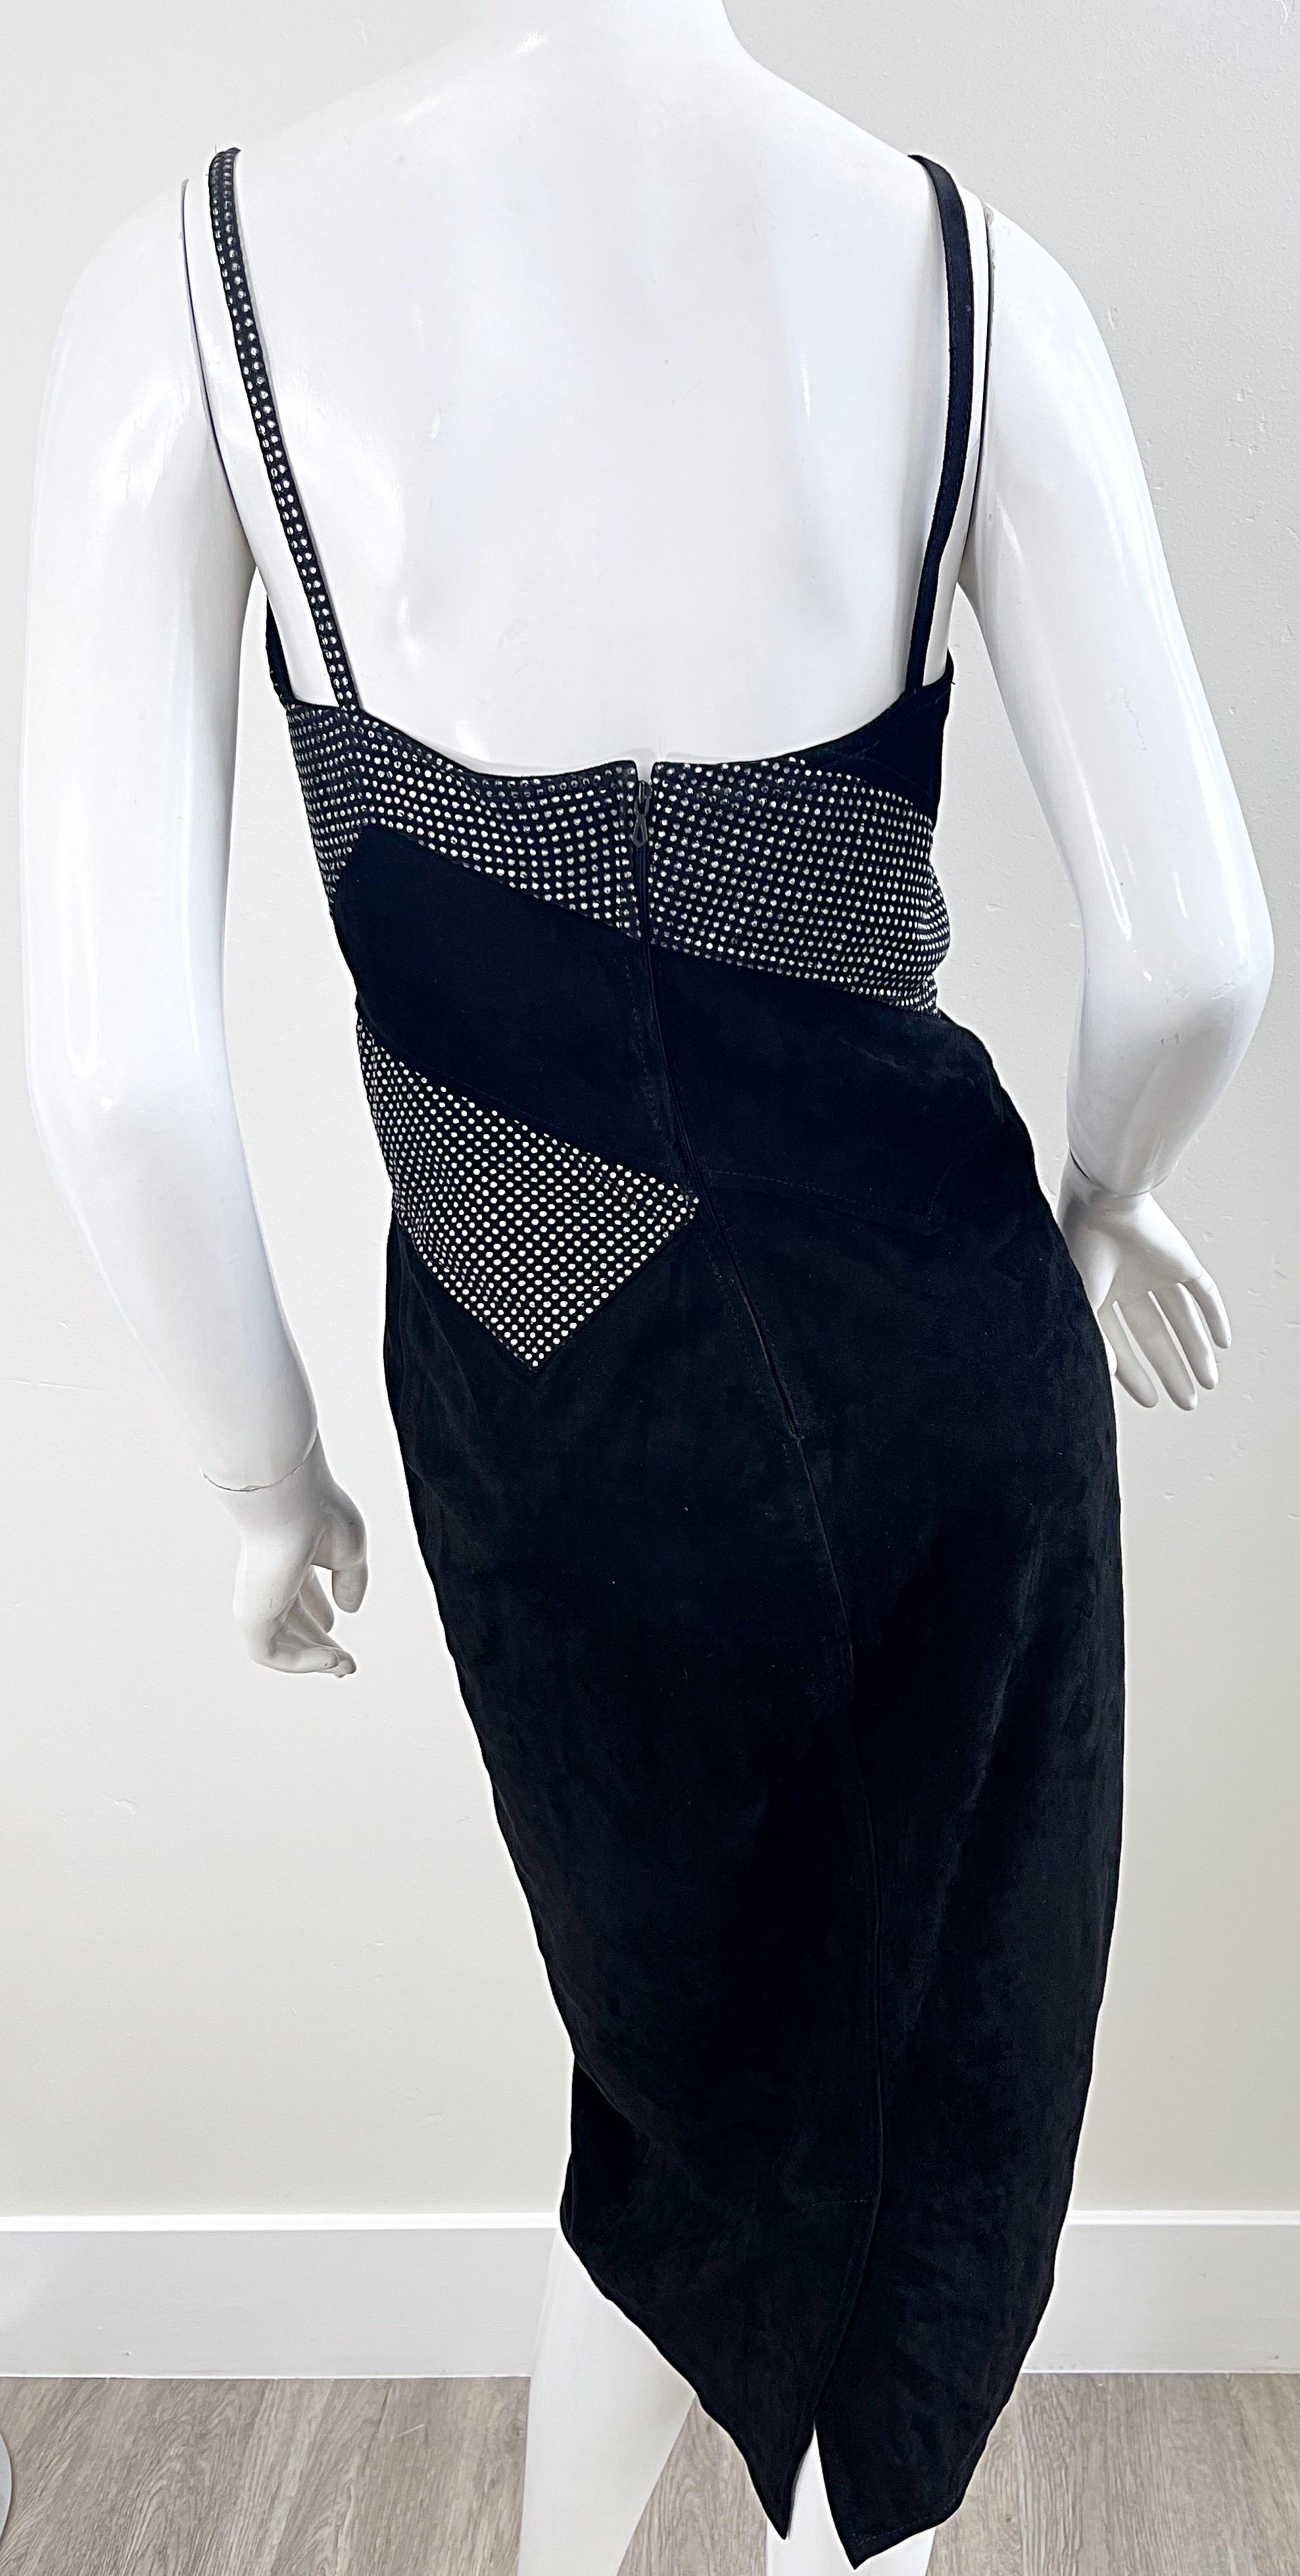 Women's Fendi 1980s Fendissime Black Silver Suede Leather Vintage 80s Hand Painted Dress For Sale